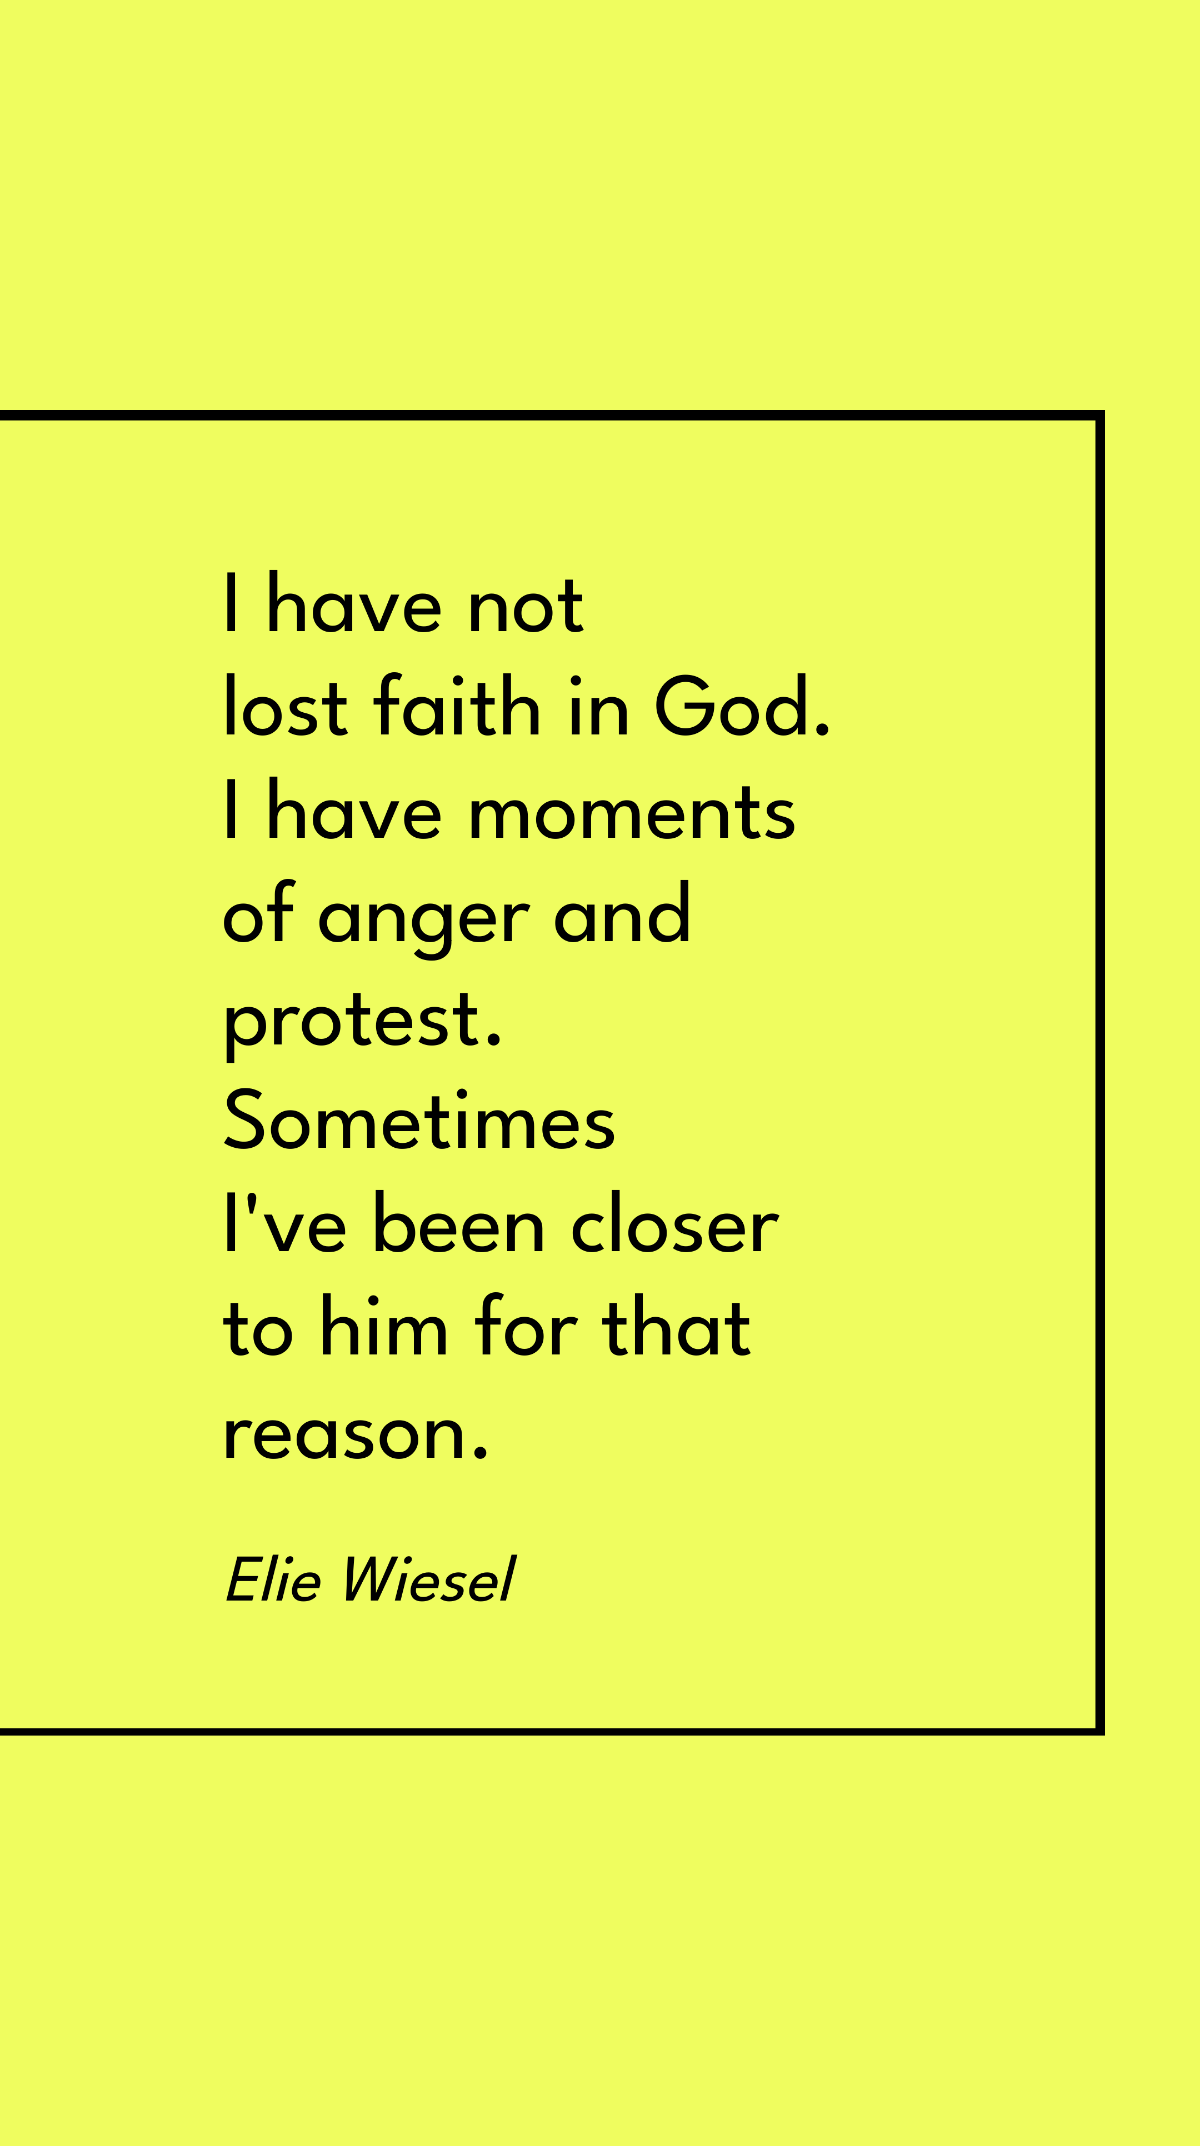 Free Elie Wiesel - I have not lost faith in God. I have moments of anger and protest. Sometimes I've been closer to him for that reason. Template